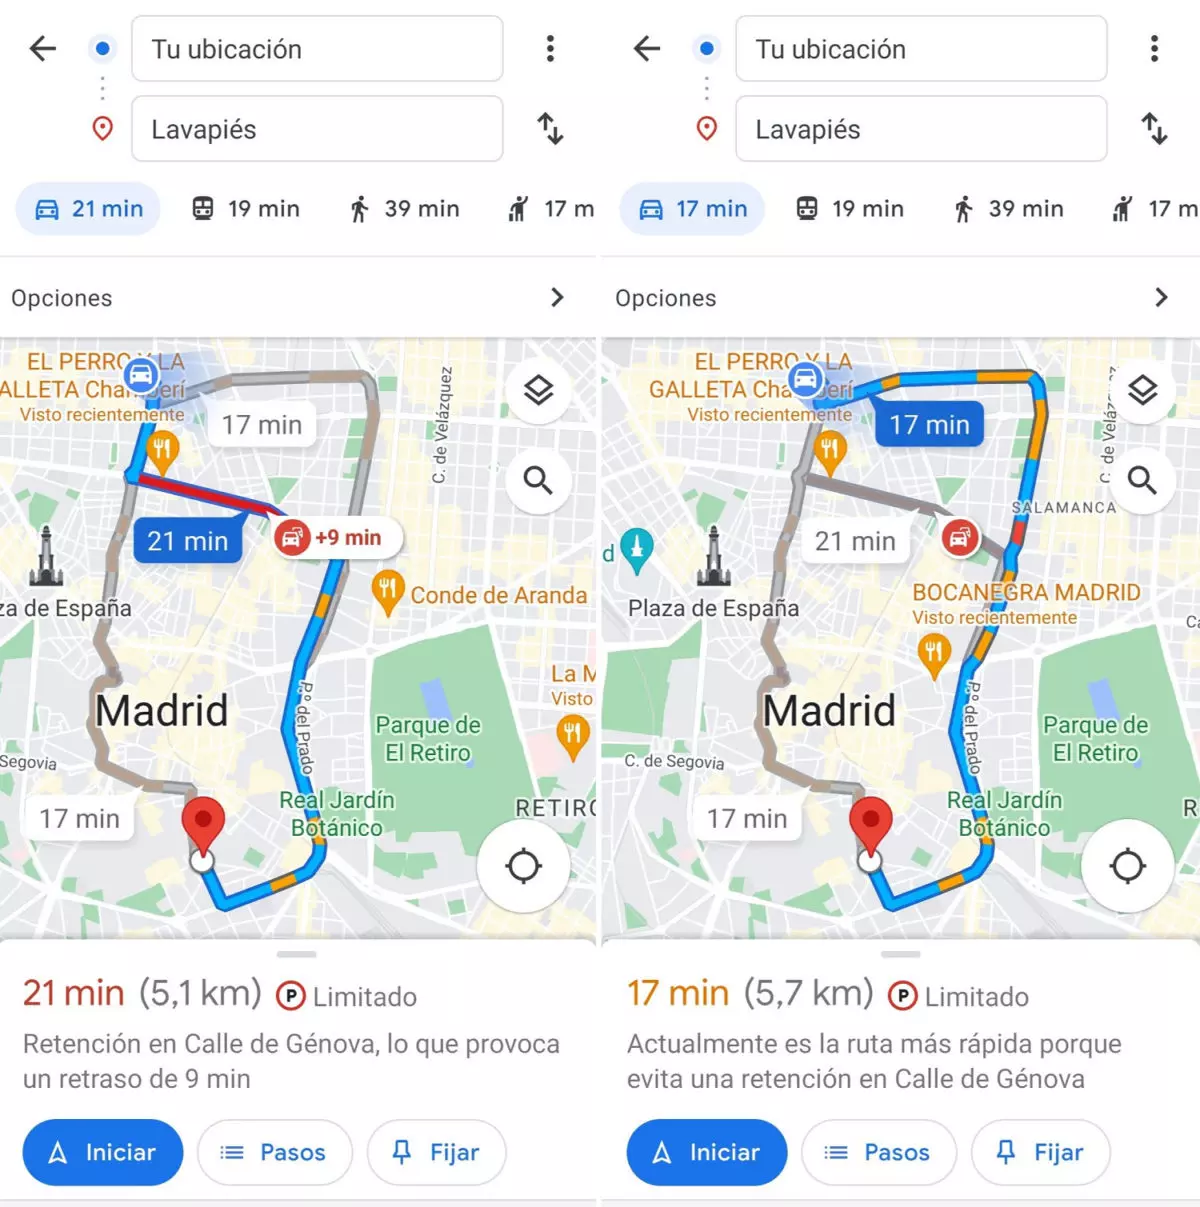 How to choose the fastest route on Google Maps